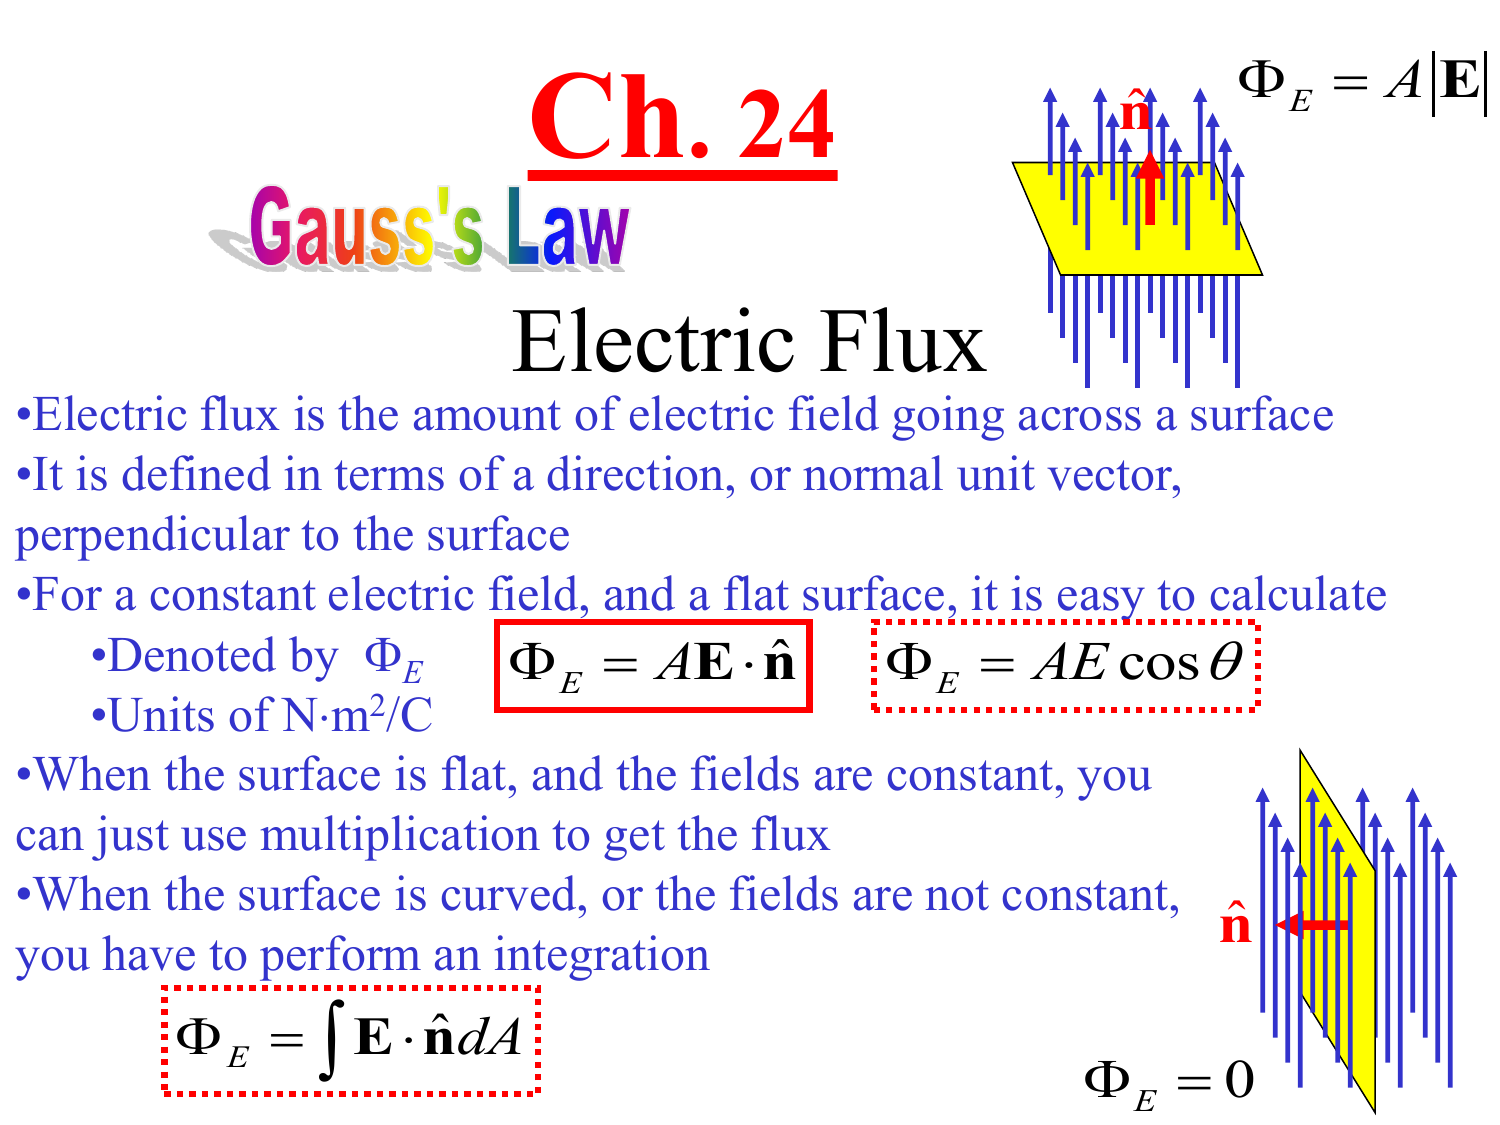 electric flux formula for closed